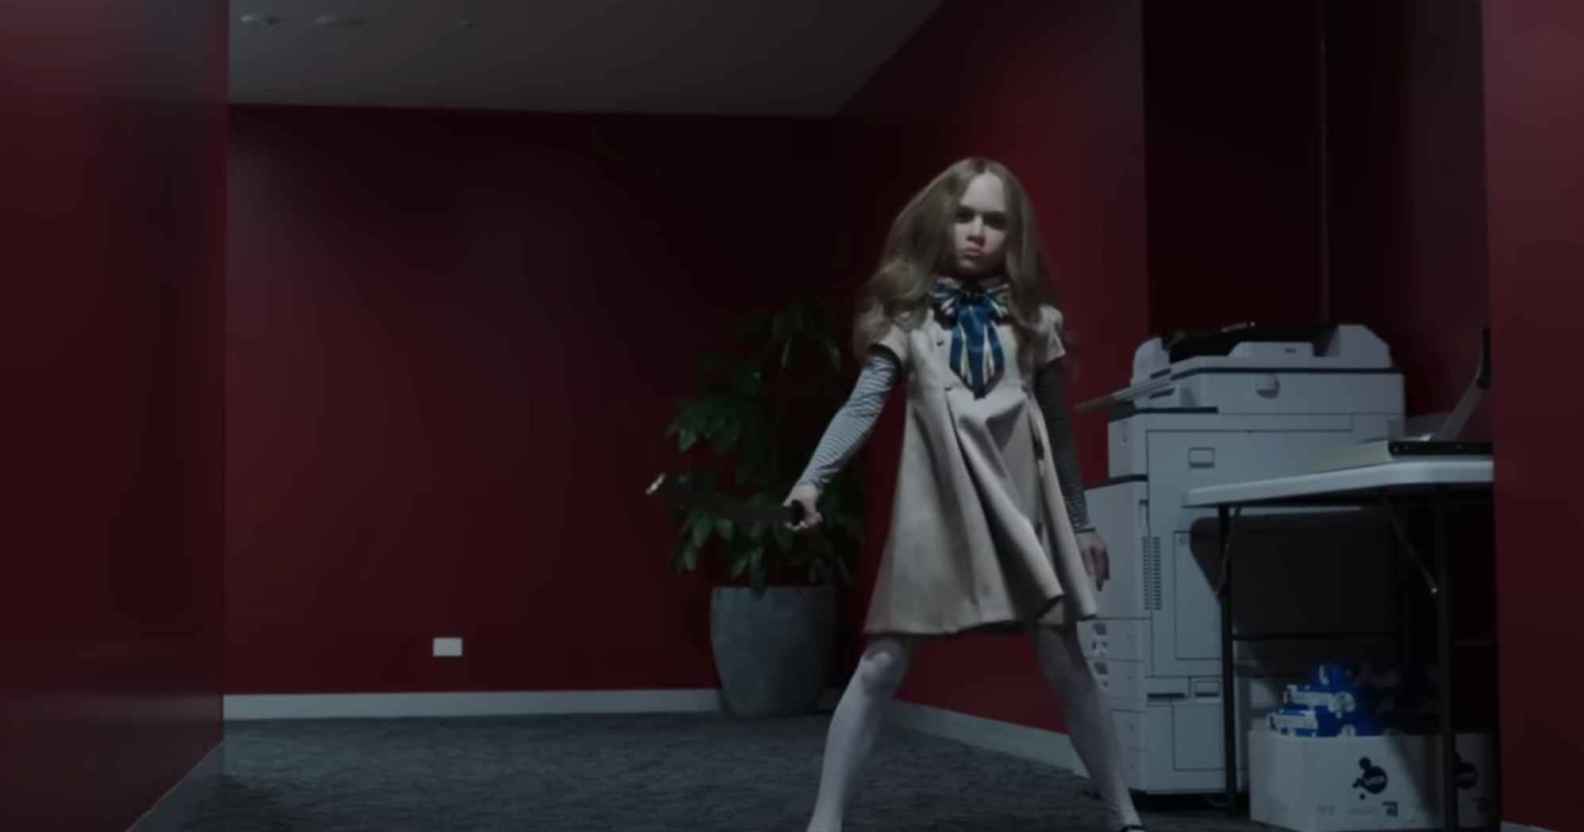 A still from horror film M3GAN showing the robot doll dancing in an office corridor that has red walls and a grey carpet. To the right of the M3GAN robot is a photocopying machine and a small table